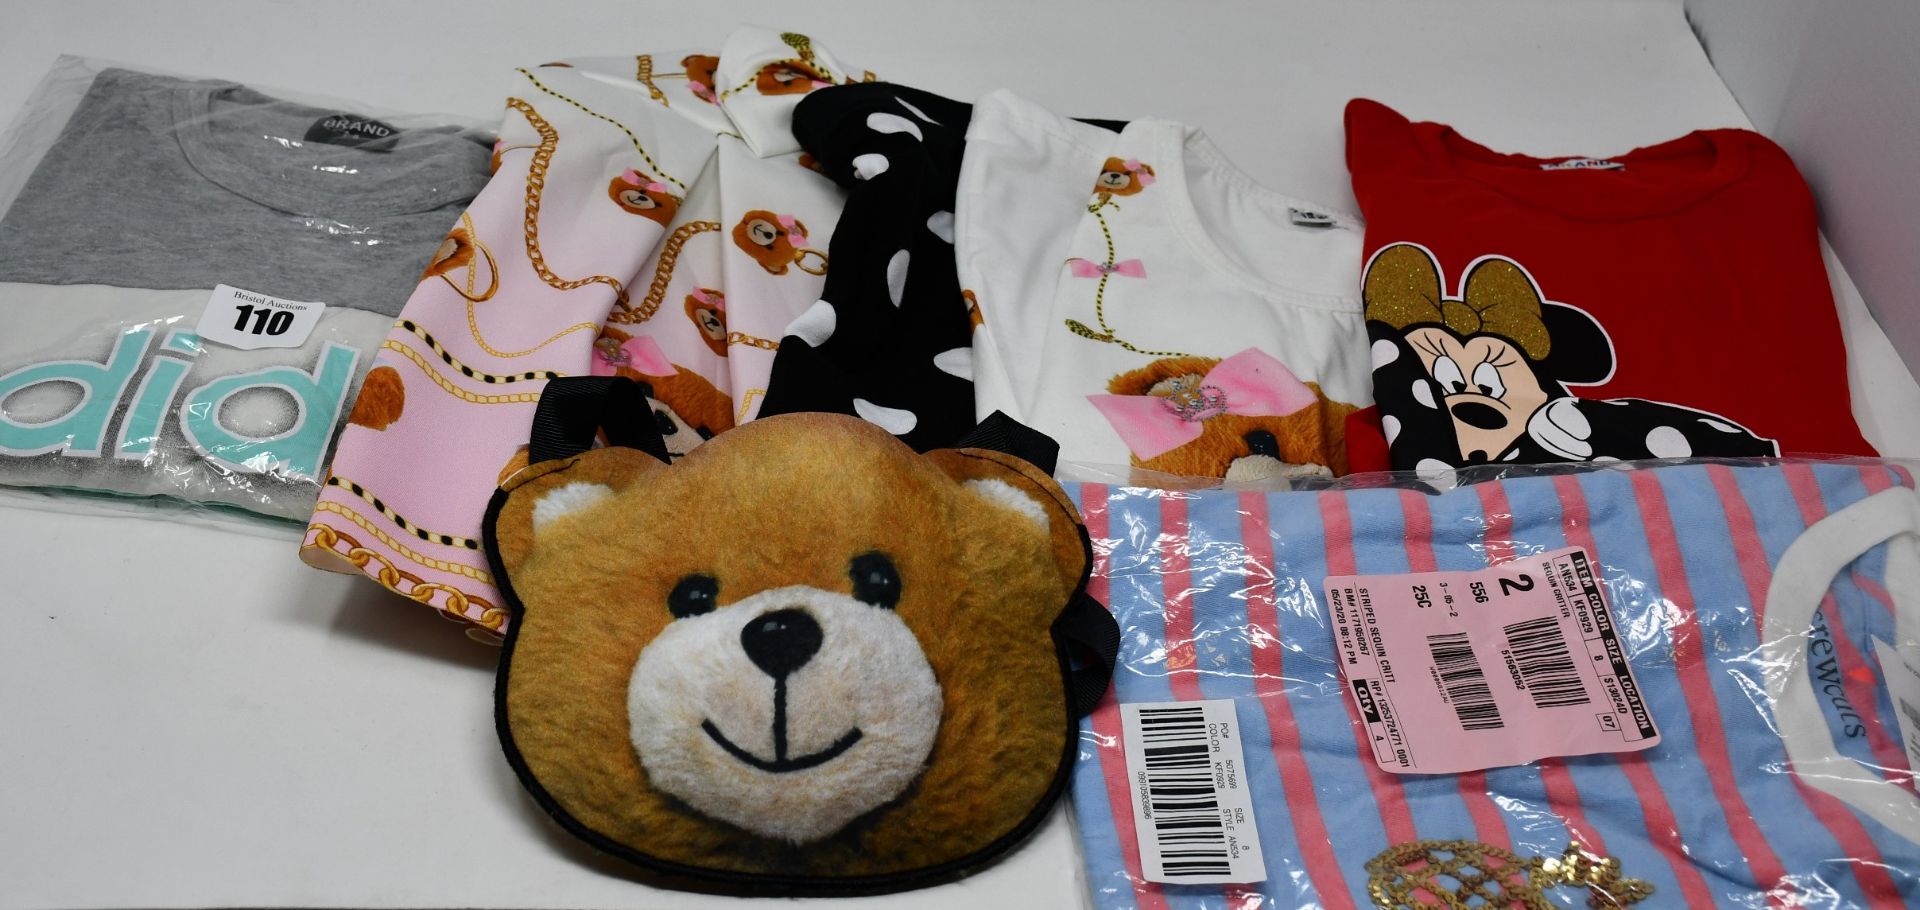 One as new Terry bear bag. One as new Minnie headbands (no tags). One as new Teddy bear headbands (